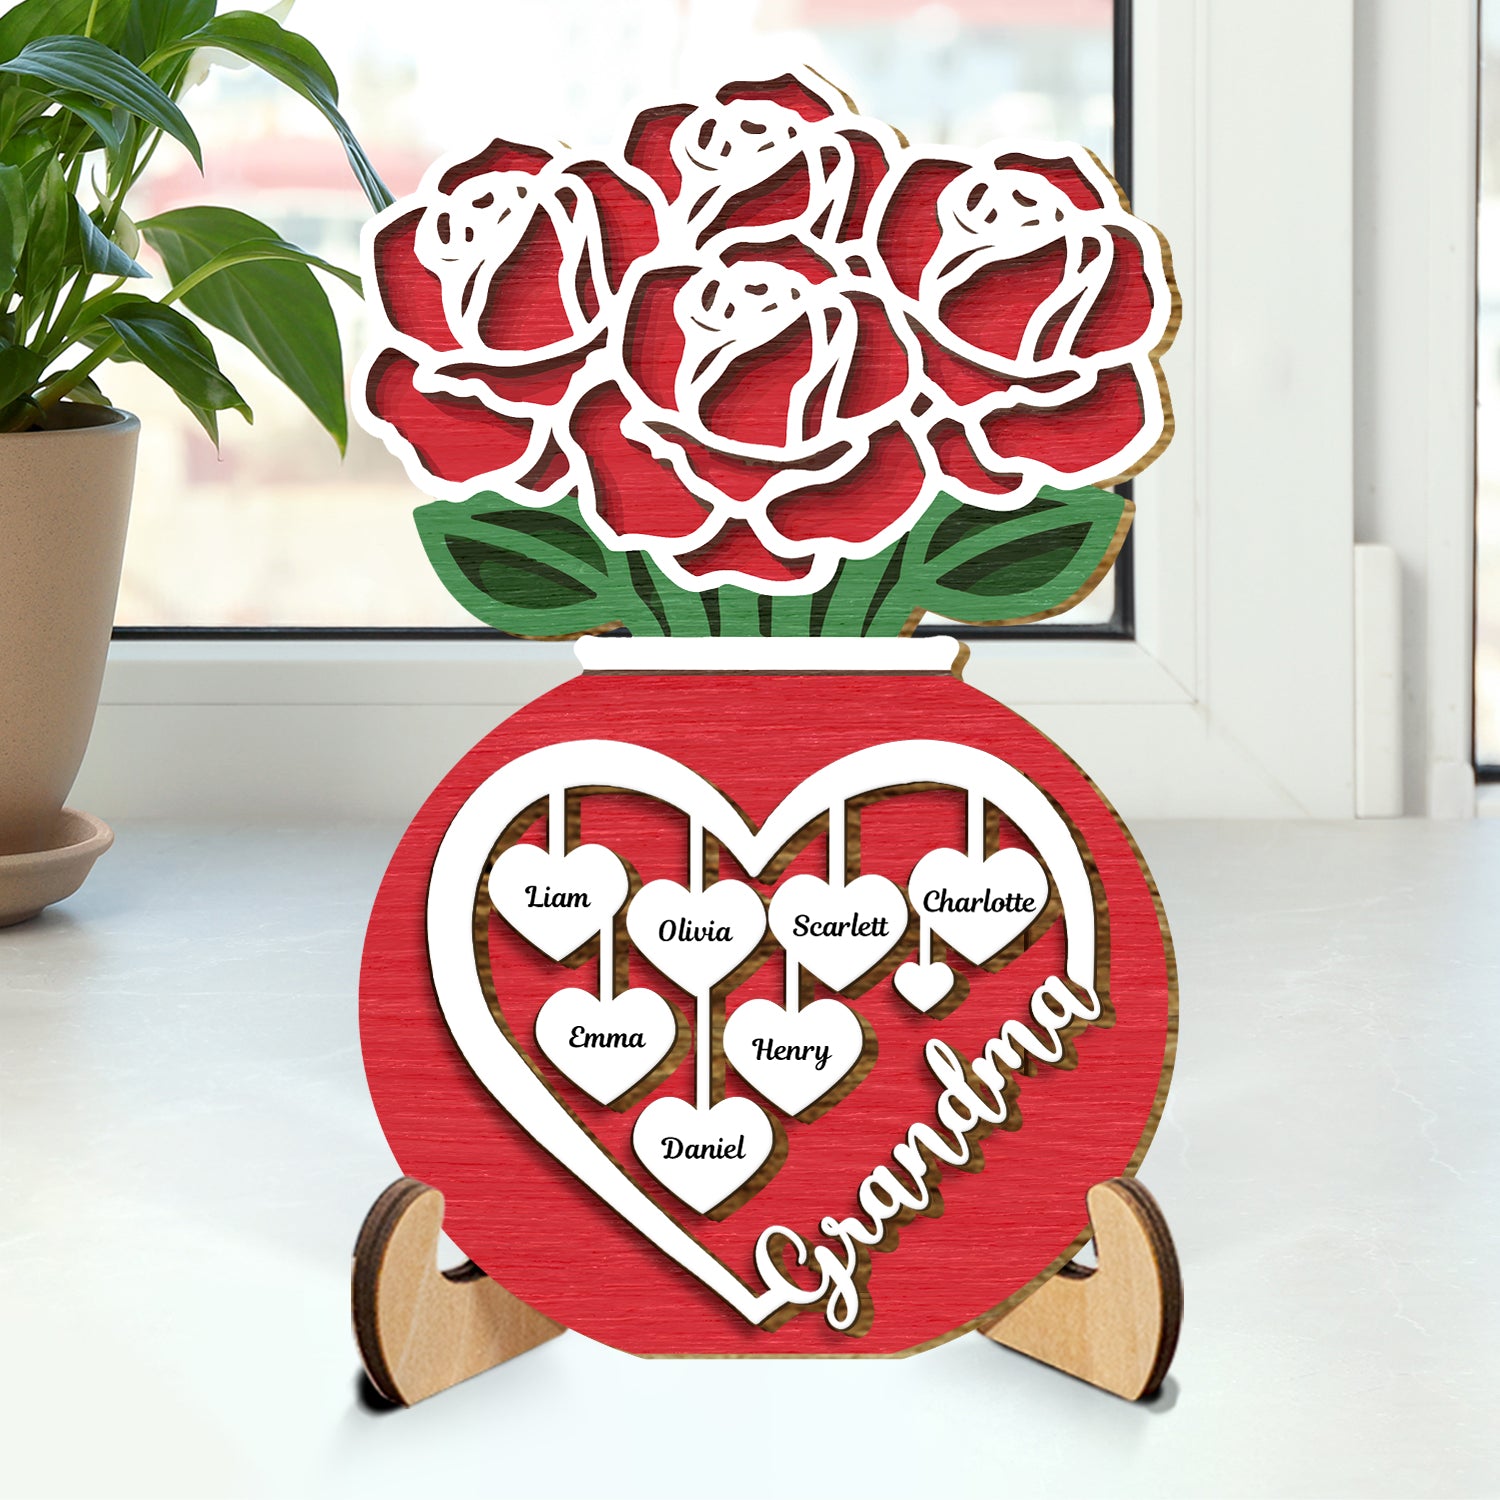 Grandma Mom Roses - Gift For Mother, Grandmother - Personalized 2-Layered Wooden Plaque With Stand